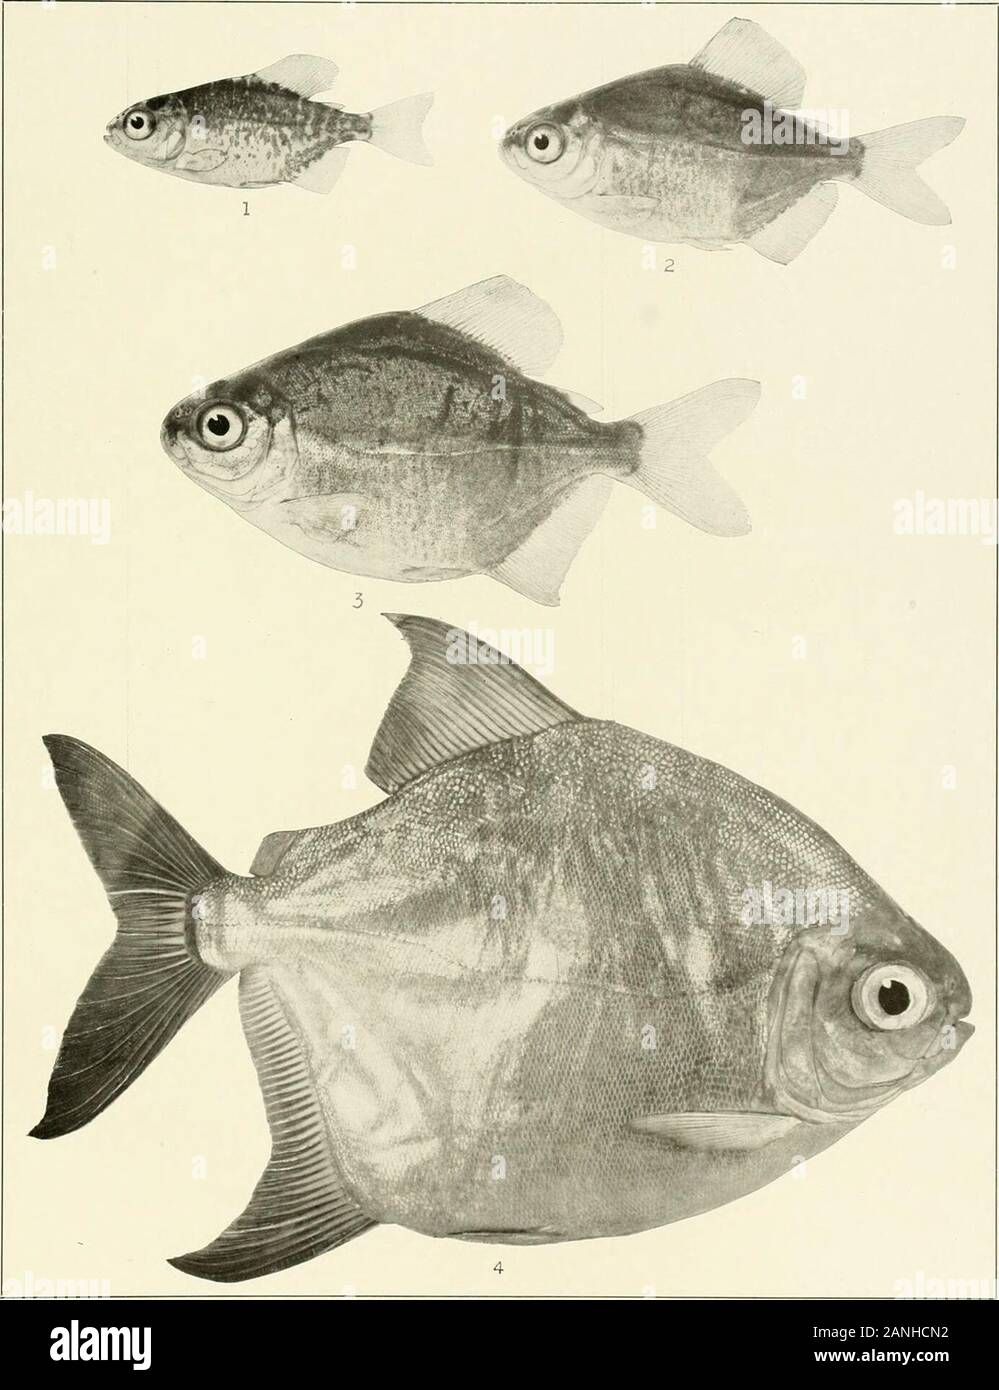 The freshwater fishes of British Guiana, including a study of the ecological grouping of species and the relation of the fauna of the plateau to that of the lowlands . 1. Metynnis maculatus (Kner) . 65 mm. No. 2216. 2. Myloplusrubripi.nnis (Muller andTroschel). 165 mm. No. 1129. 3. Myloplus asterias (Muller and Troschel), c?. Memoirs Carnegie Museum, Vol. V. Plate LVIII.. Myloplus rhomboidalis (Ctjvier). 1.22 mm. No. 2219a. 2.31.5 mm. No. 22196. 3.40 mm. No. 2219c.4. 219 mm. No. 1490. Memoirs Carnegie Museum, Vol. V. Plate LIX. Stock Photo